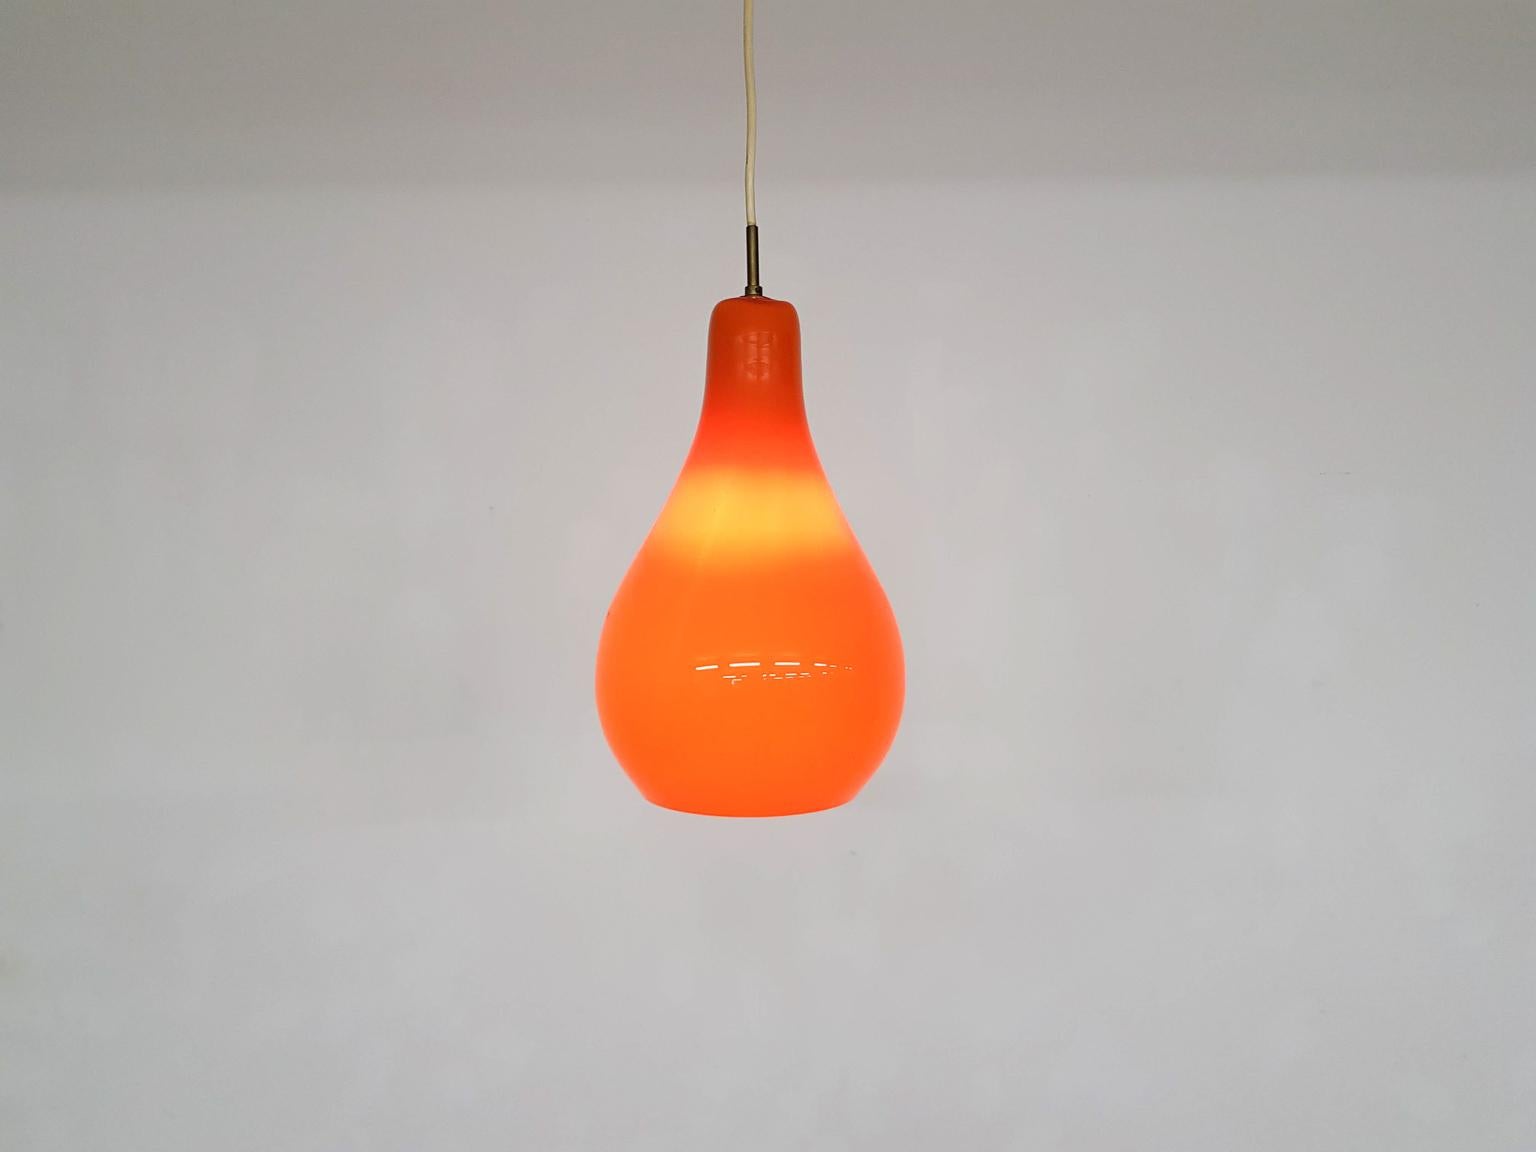 Orange glass pendant light attributed to Gino Vistosi for Venini Murano, circa 1962. 

A beautiful handblown glass pendant lamp from Italy, 1960s. Made of Murano glass.  Lamp gives an amazing warm, orange glow when put on.

Lamp is in good condition